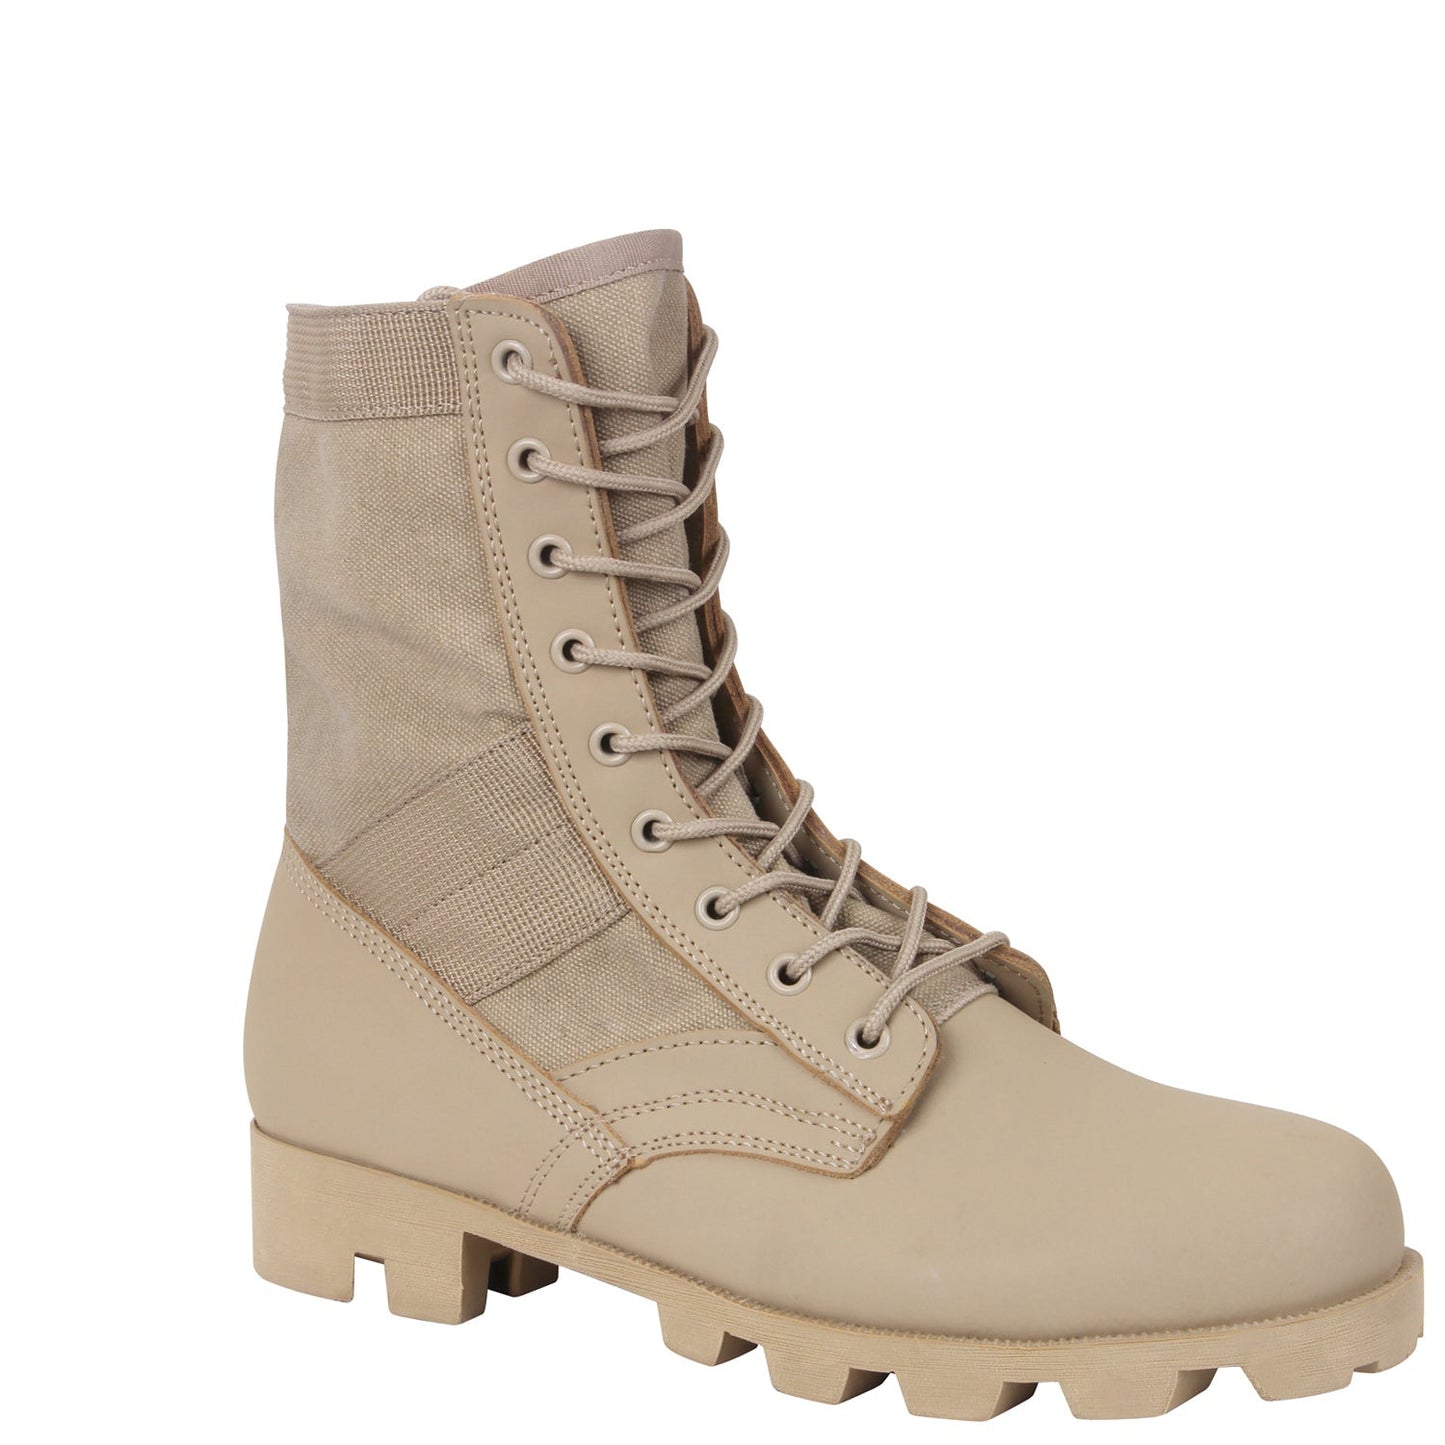 With the rugged design of a combat boot and the lightweight feel of a running shoe, Rothco’s Military Jungle Boots provide unparalleled tread, flexibility, and comfort while you perform combat training, rucking, playing a competitive game of paintball, and many other outdoor activities.